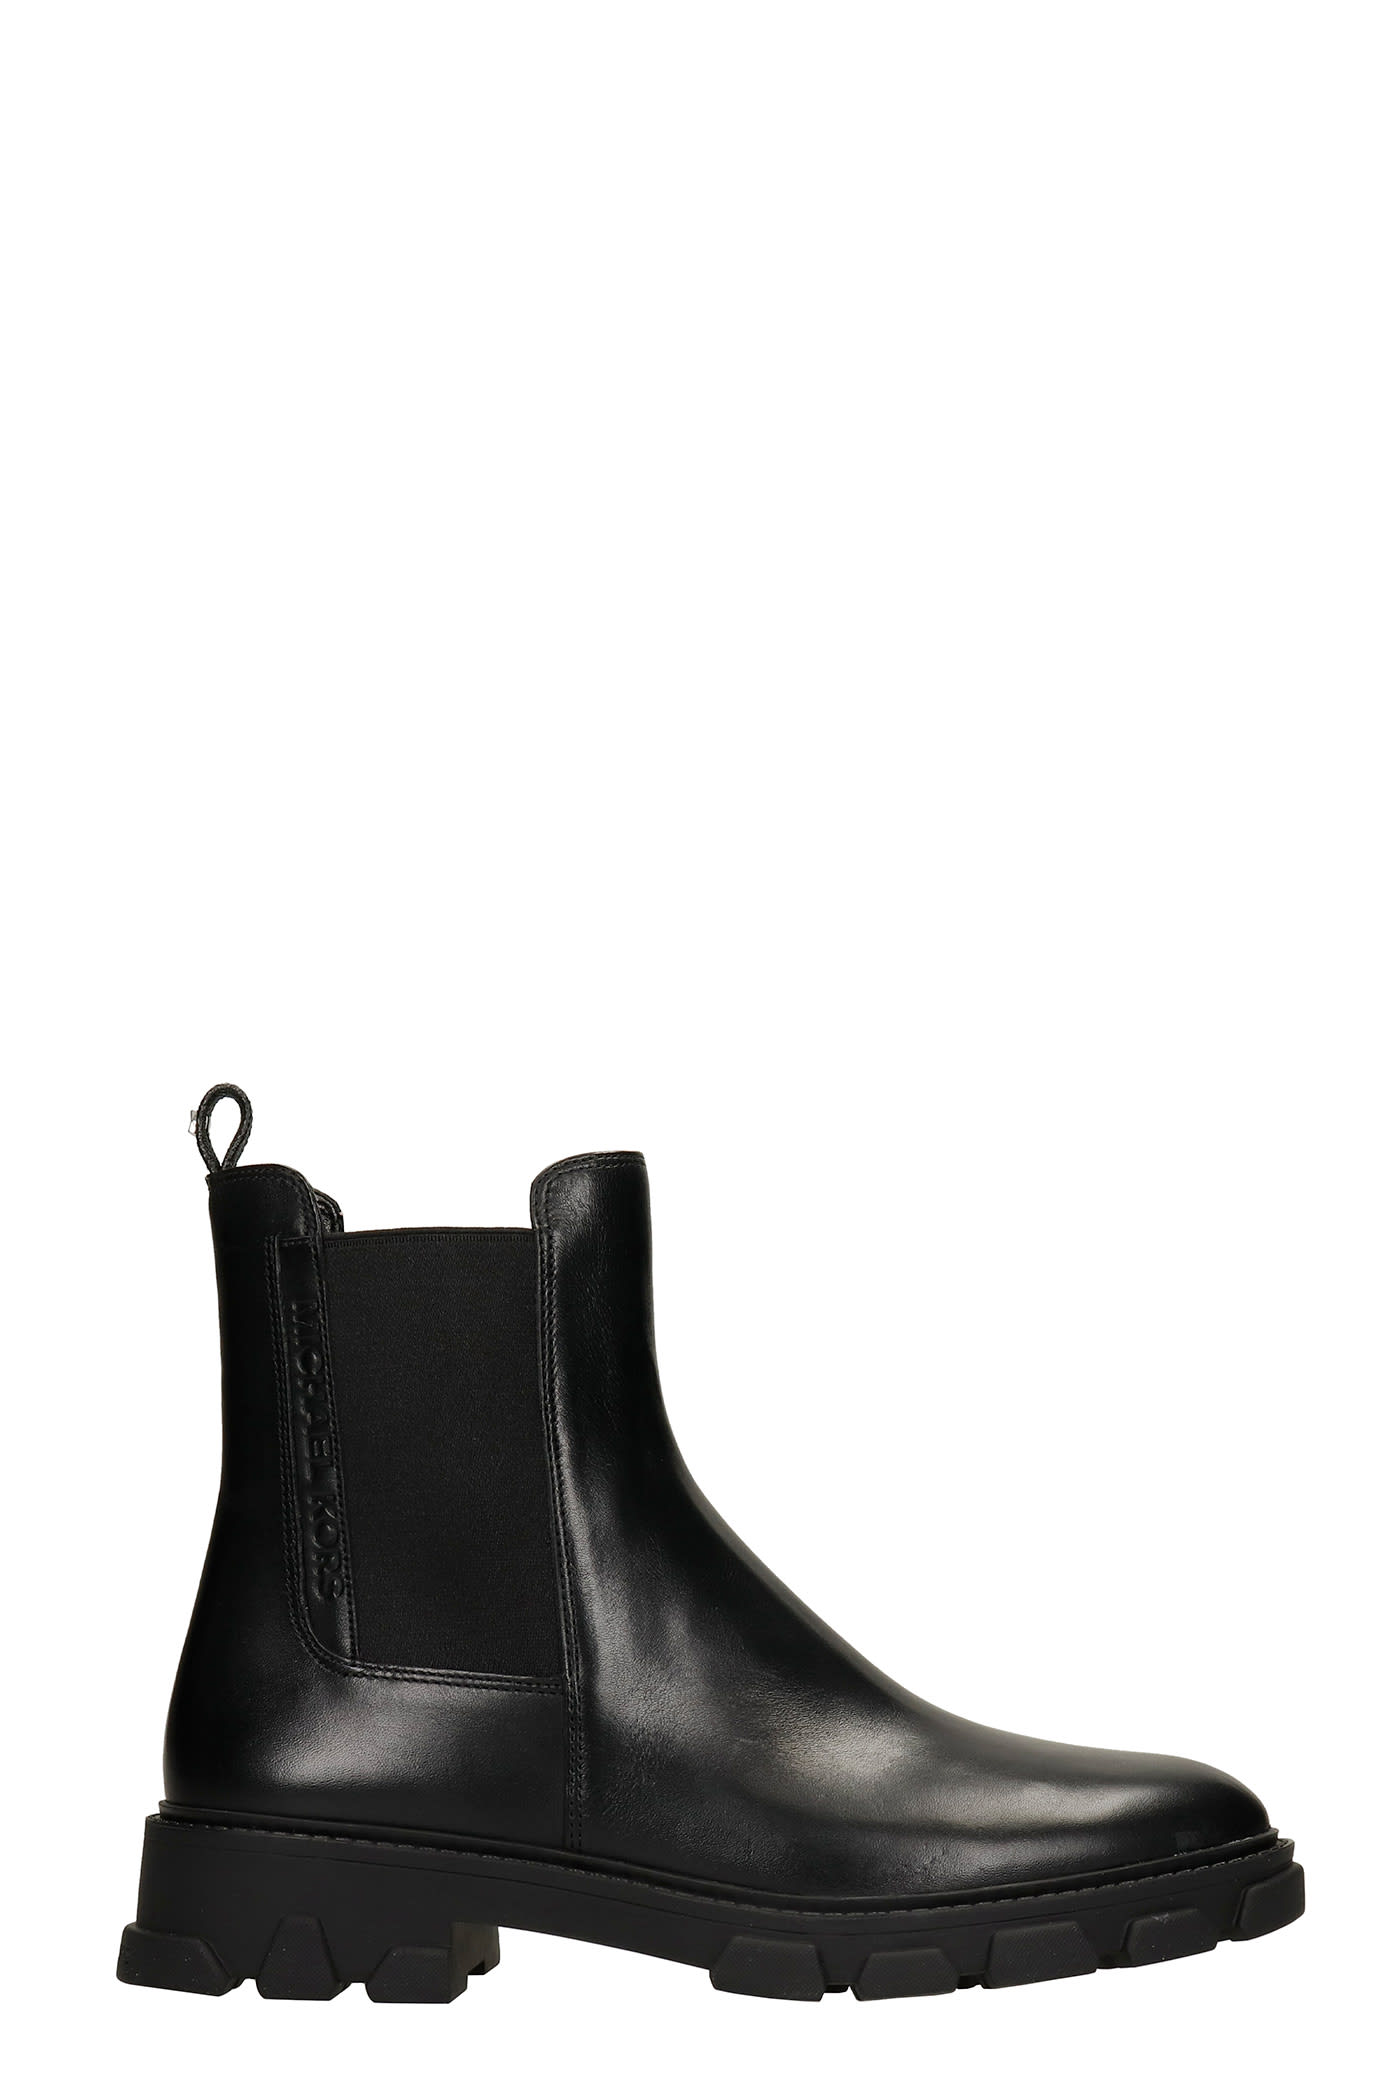 Michael Kors Ridley Combat Boots In Black Leather